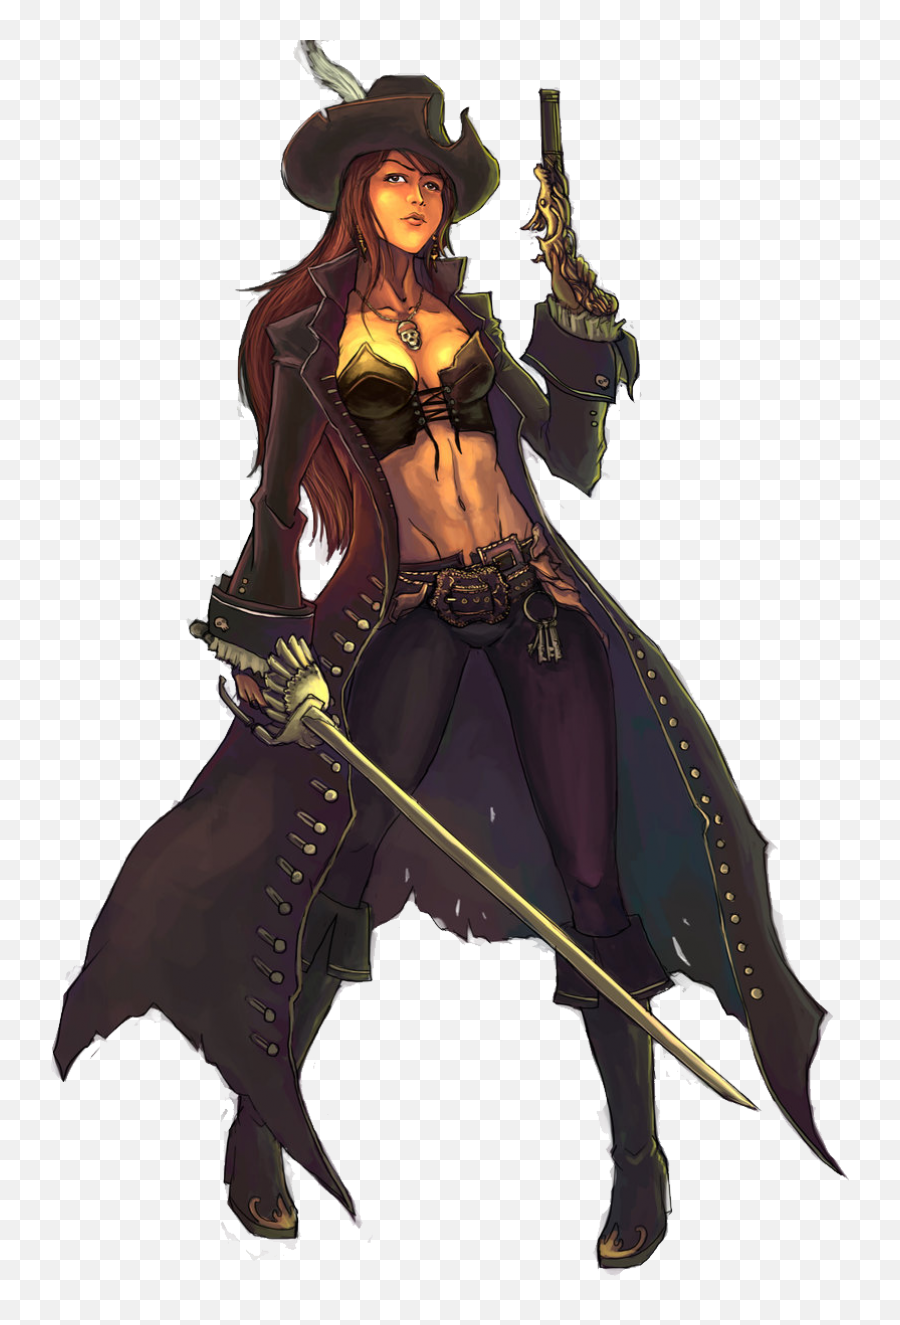 Png Background - Anime Pirate Girl,Pirate Transparent